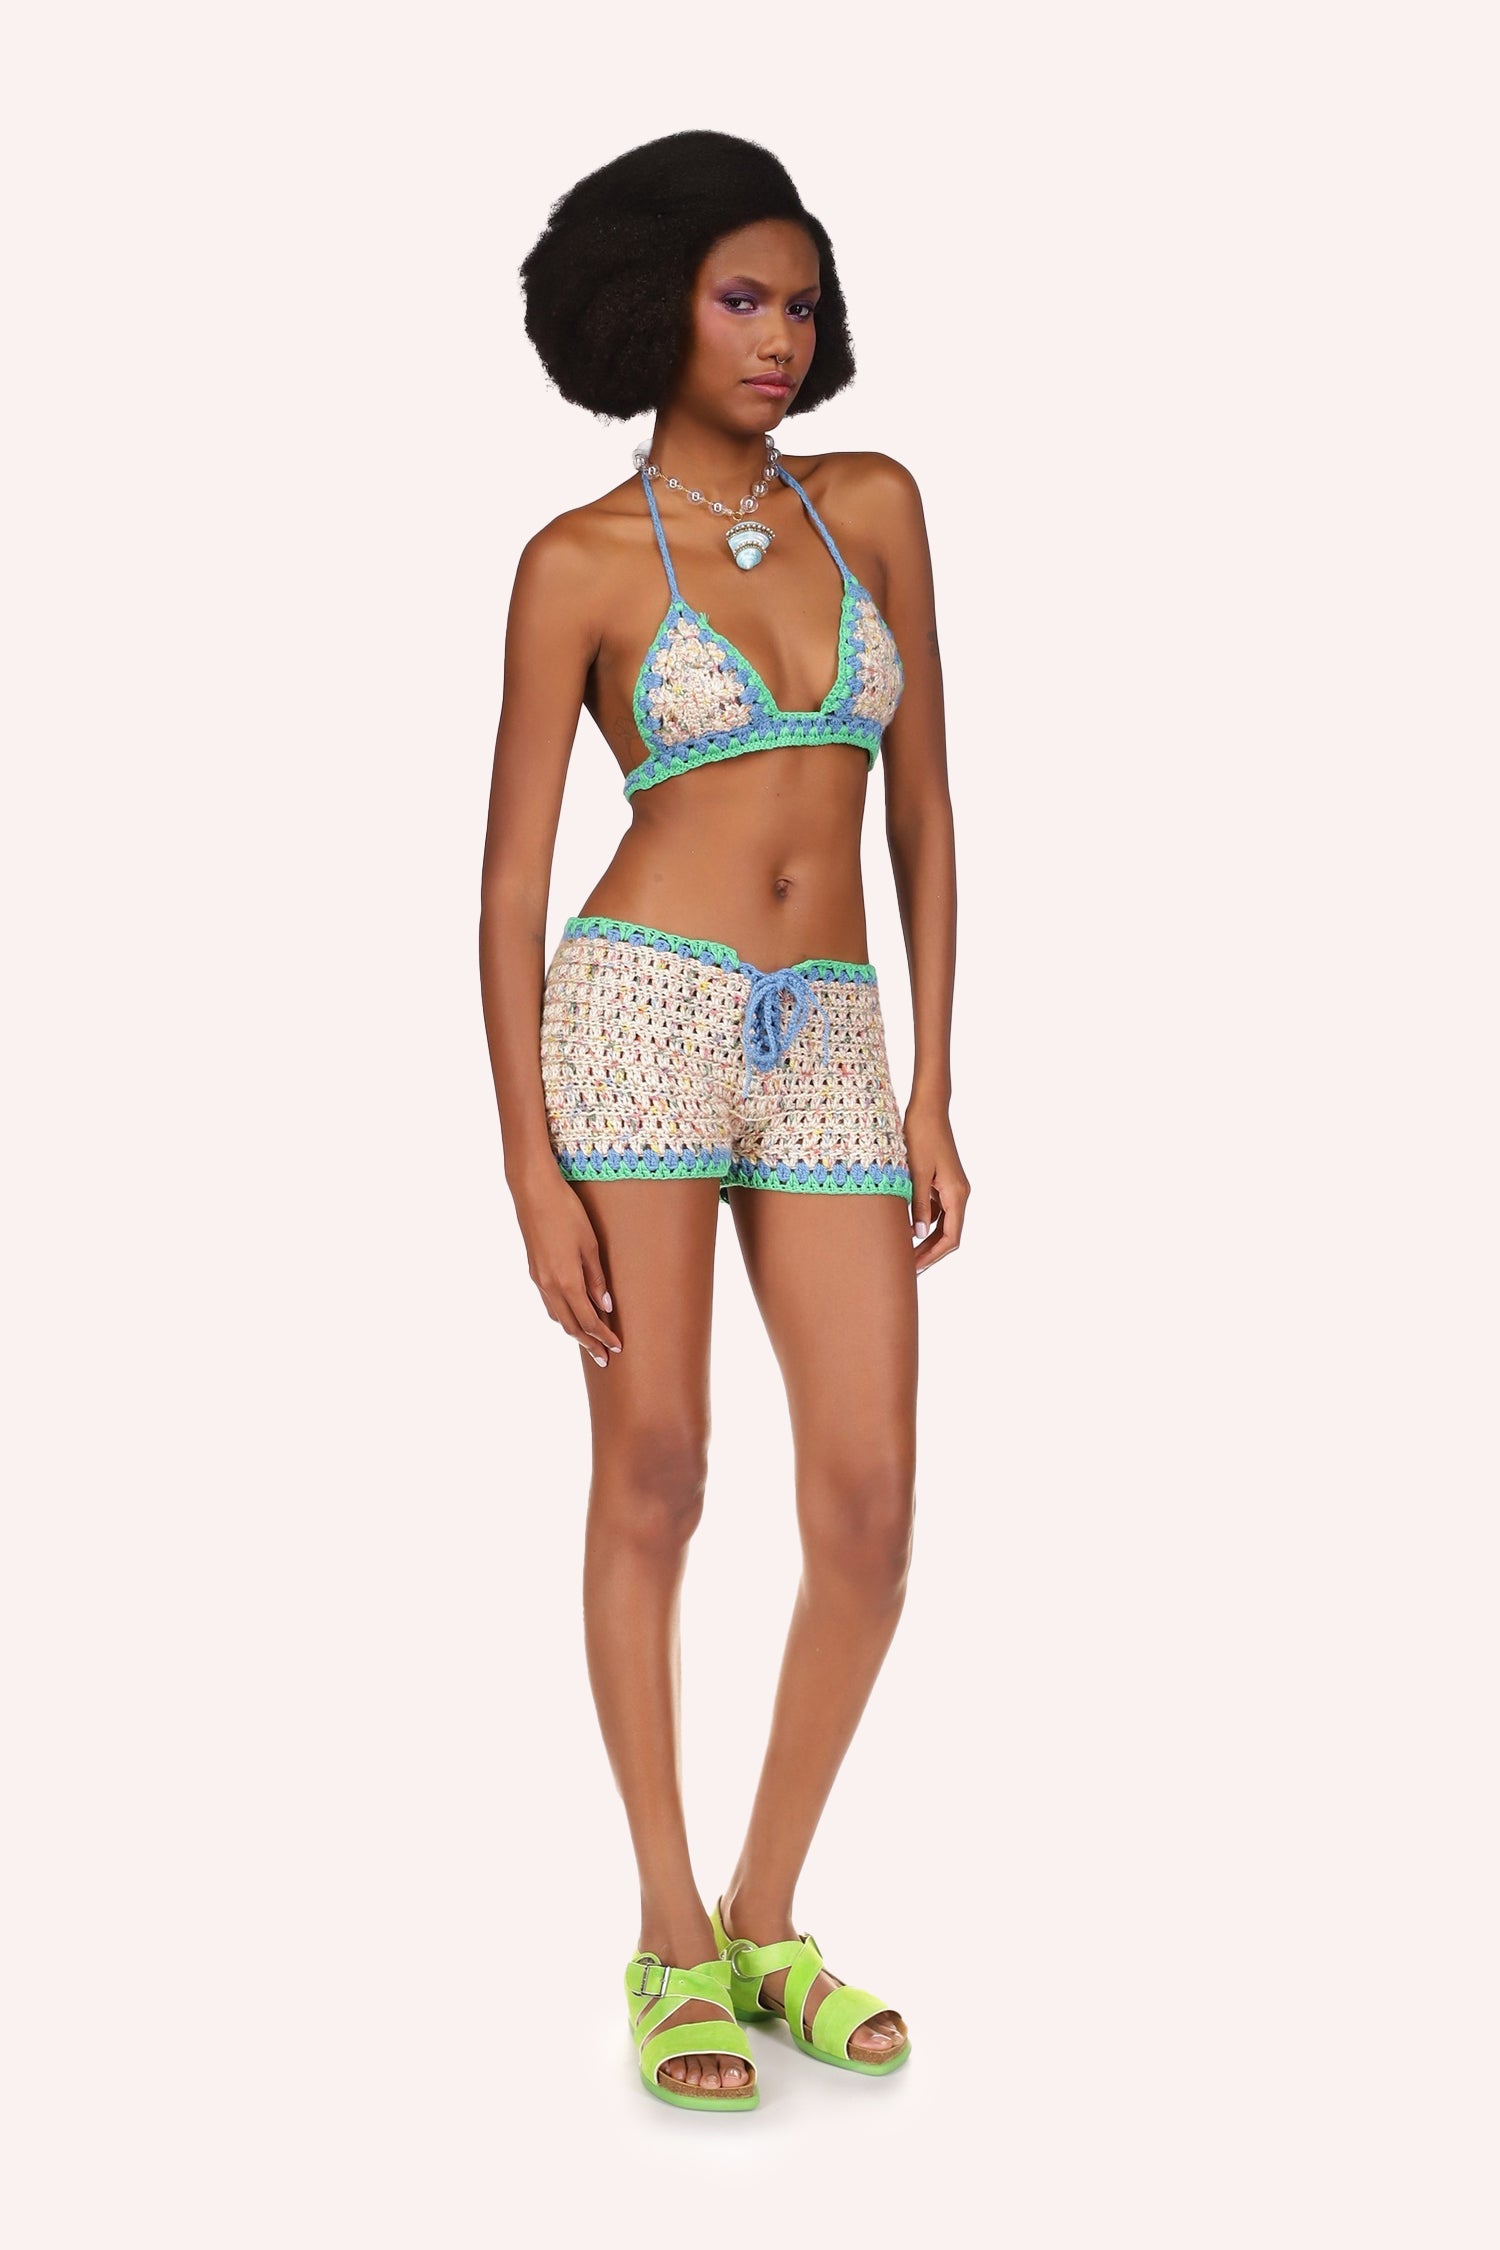 Rivera Crochet Set Marine, top is tied with a blue ribbon, 2-straps goes over the shoulders